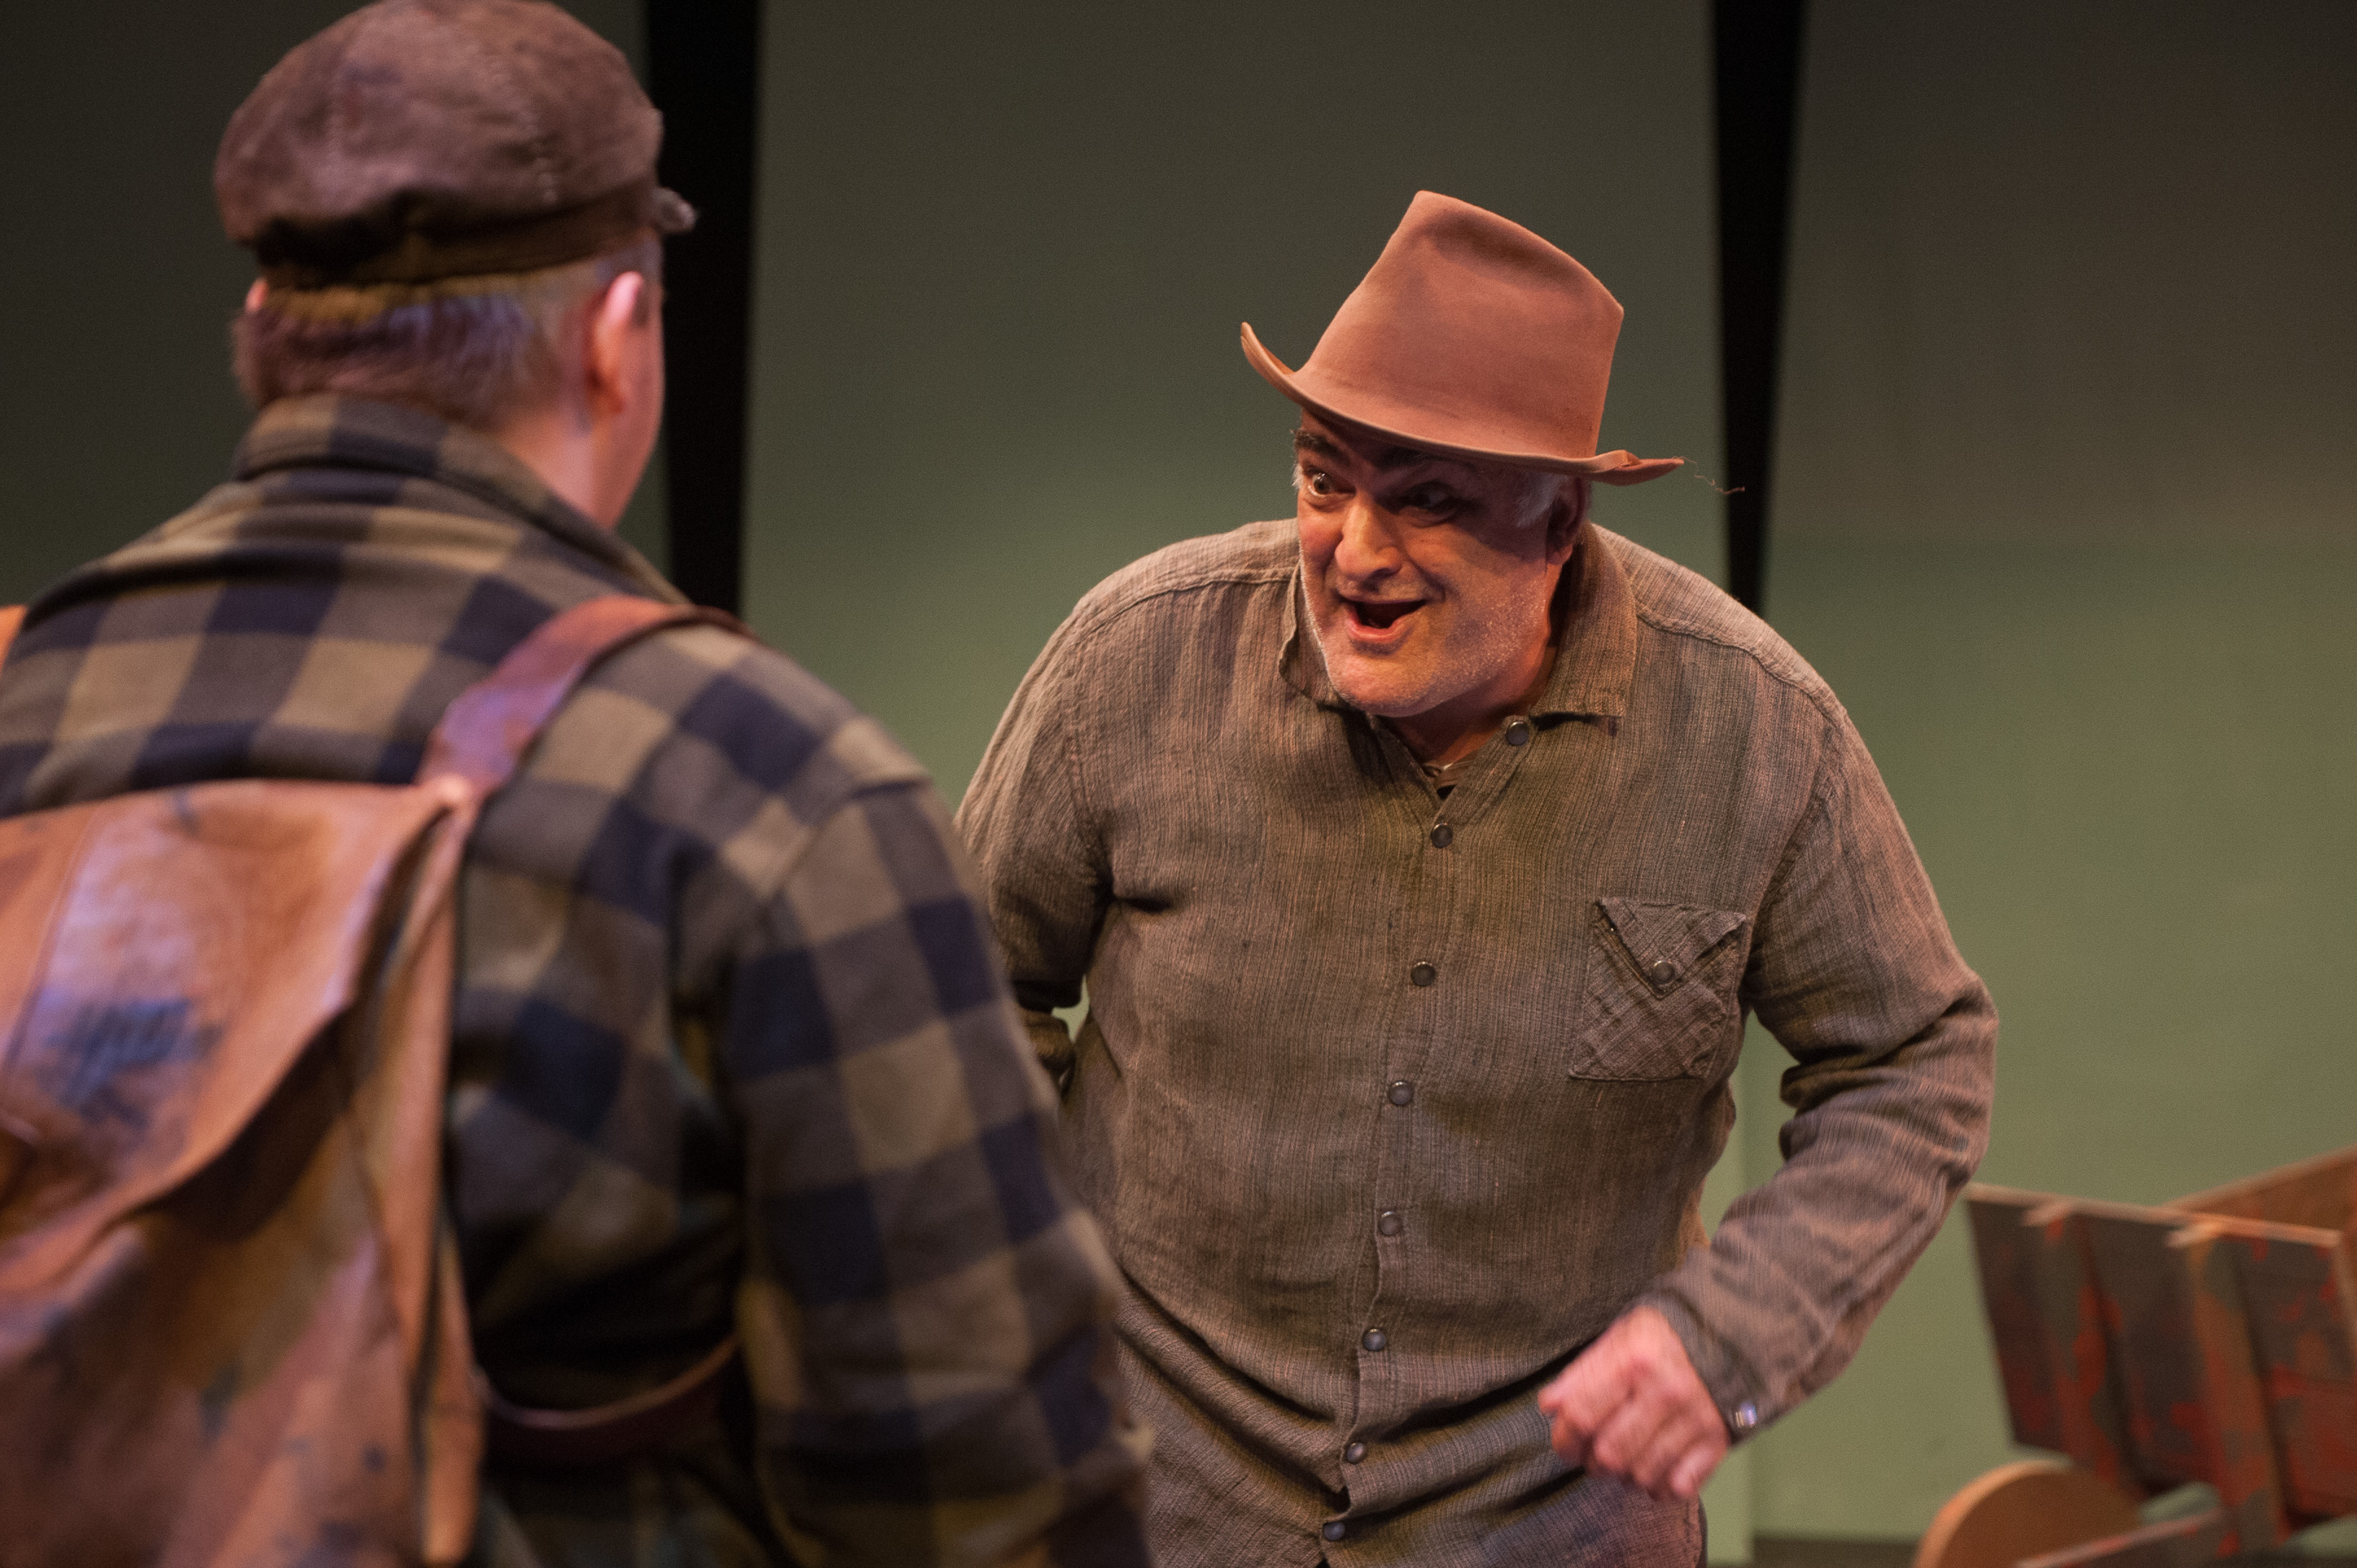 Robert Eddy, First Light Studios captures Mark S. Robert's brilliant portrayal of Ol' Farmer Walter K in this scene from LNT's premiere production of DISAPPEARANCES directed & adapted for stage by Kim Allen Bent